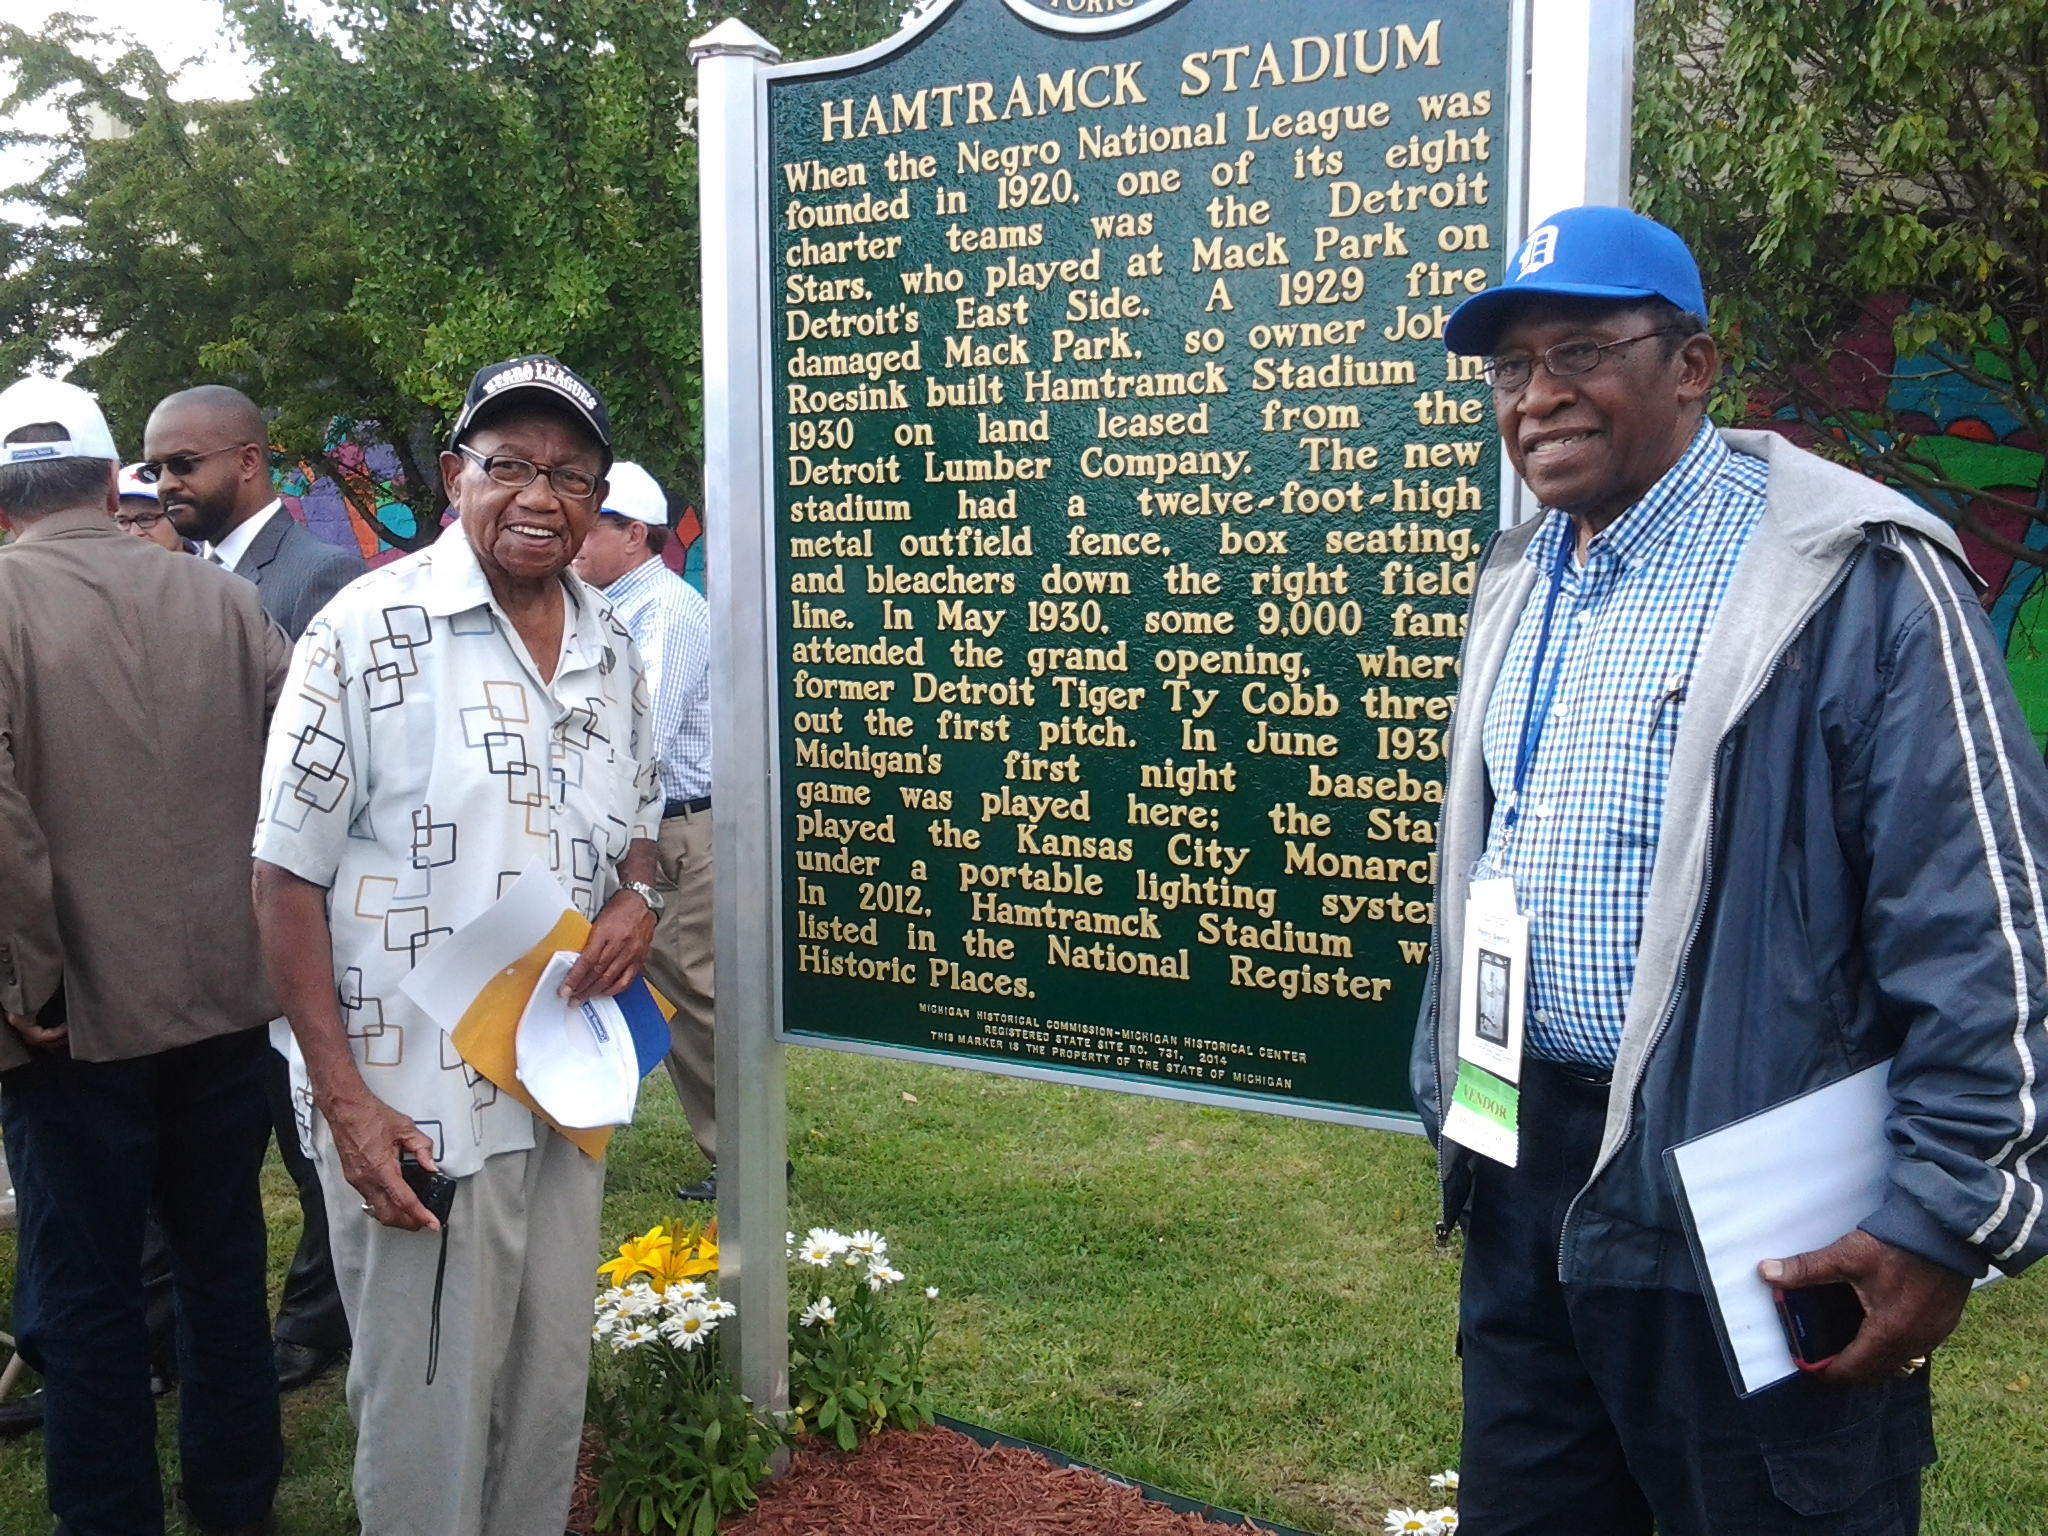 A historical marker was dedicated outside of Hamtramck Stadium near Detroit, Michigan, in 2014.